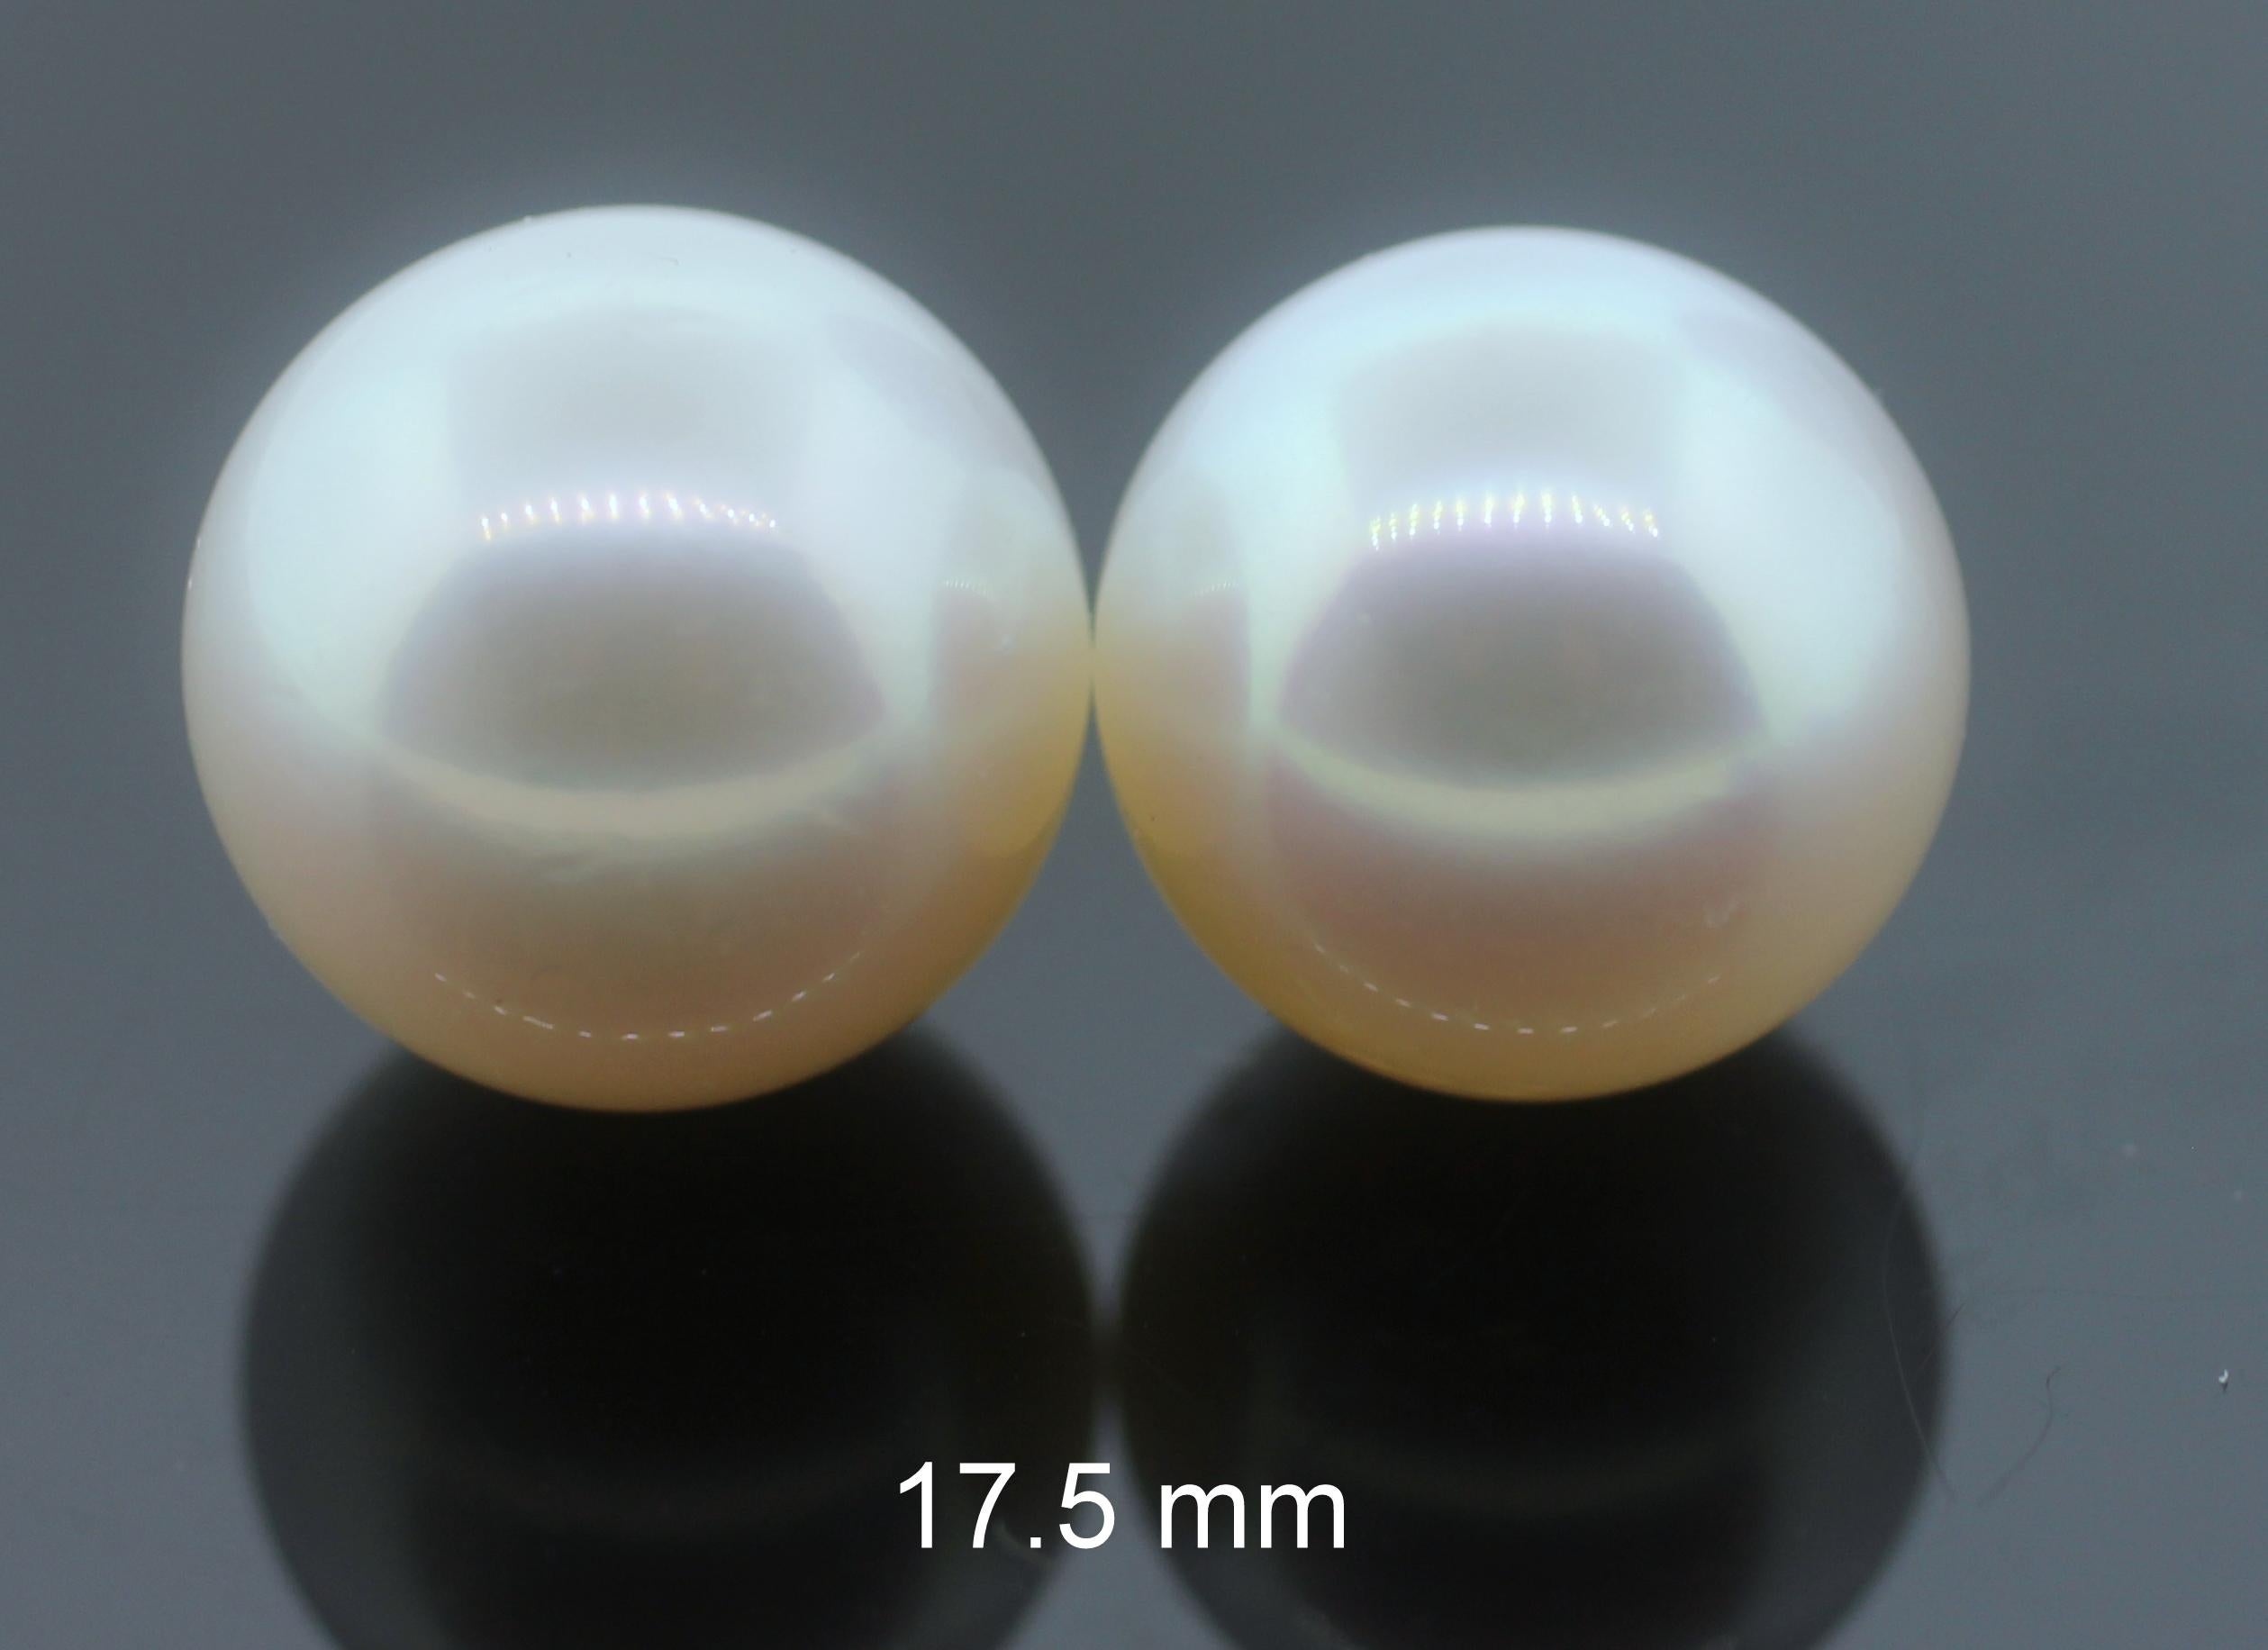 Hakimoto By Jewel Of Ocean Round South Sea Pearl
Pair of 17.5 mm White 
16.7 Grams
Australian South Sea Pearl
Aproximate